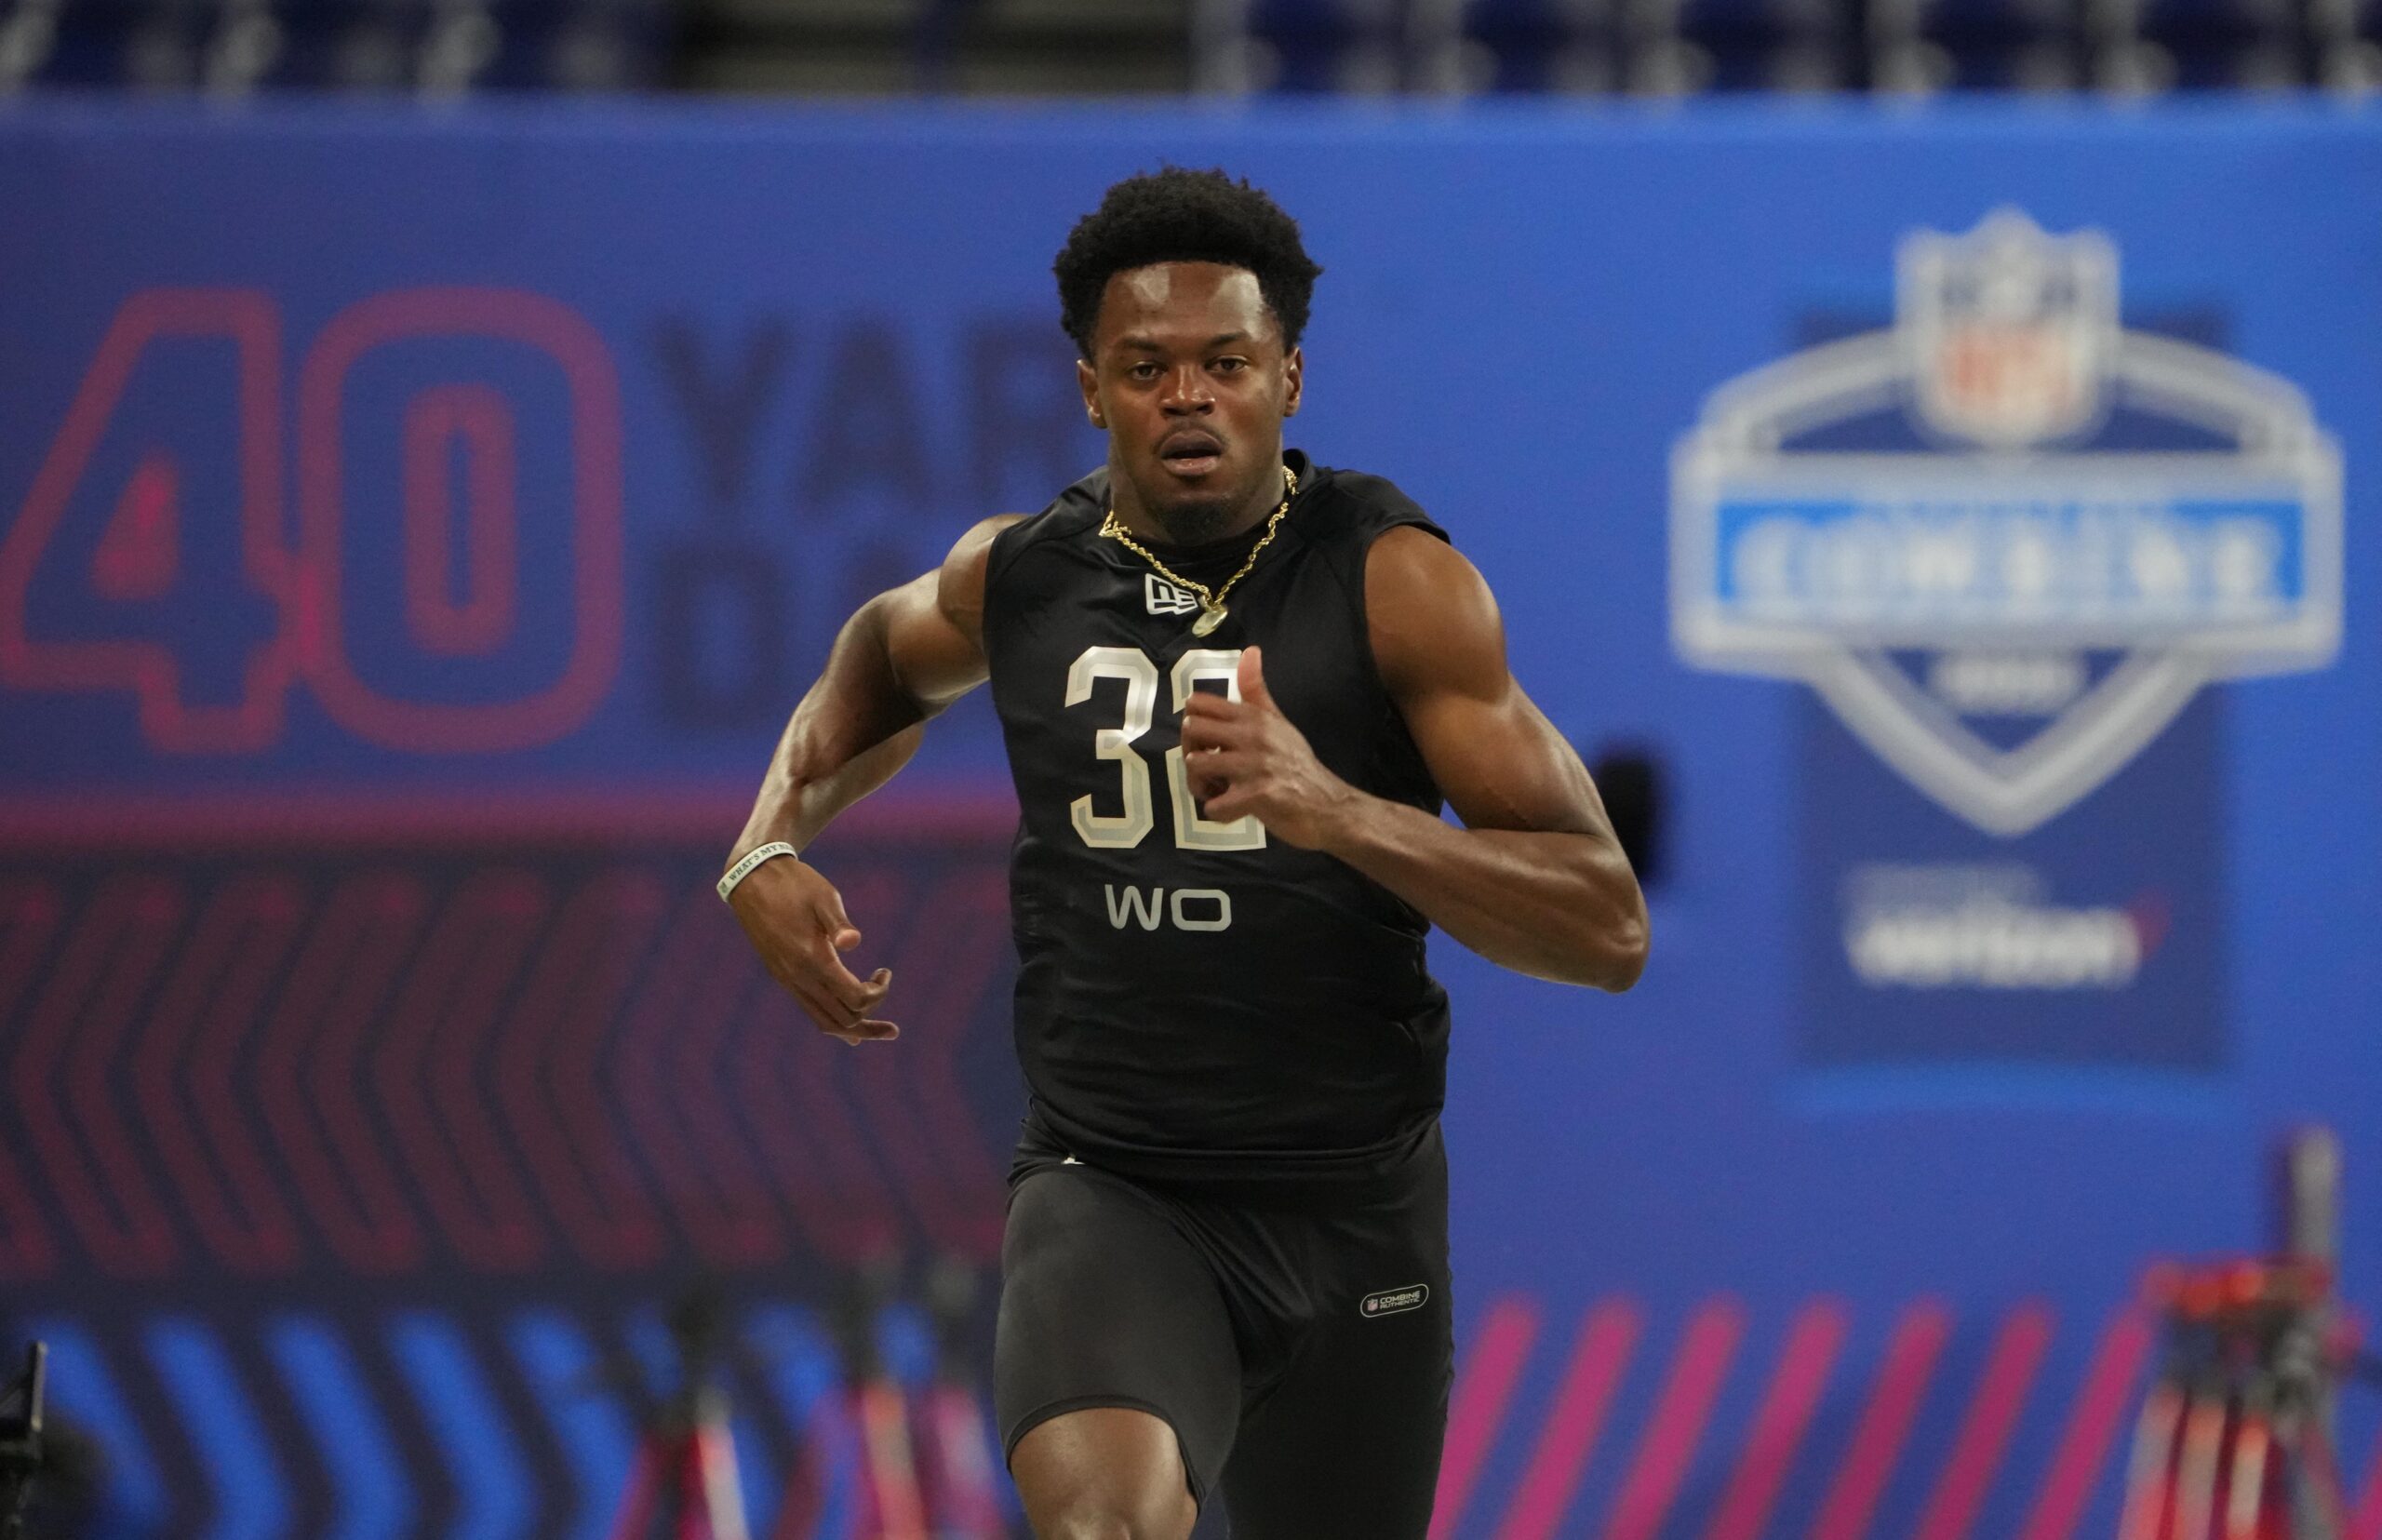 NFL Draft Odds and Betting Props: Best Bets for the 2023 NFL Draft